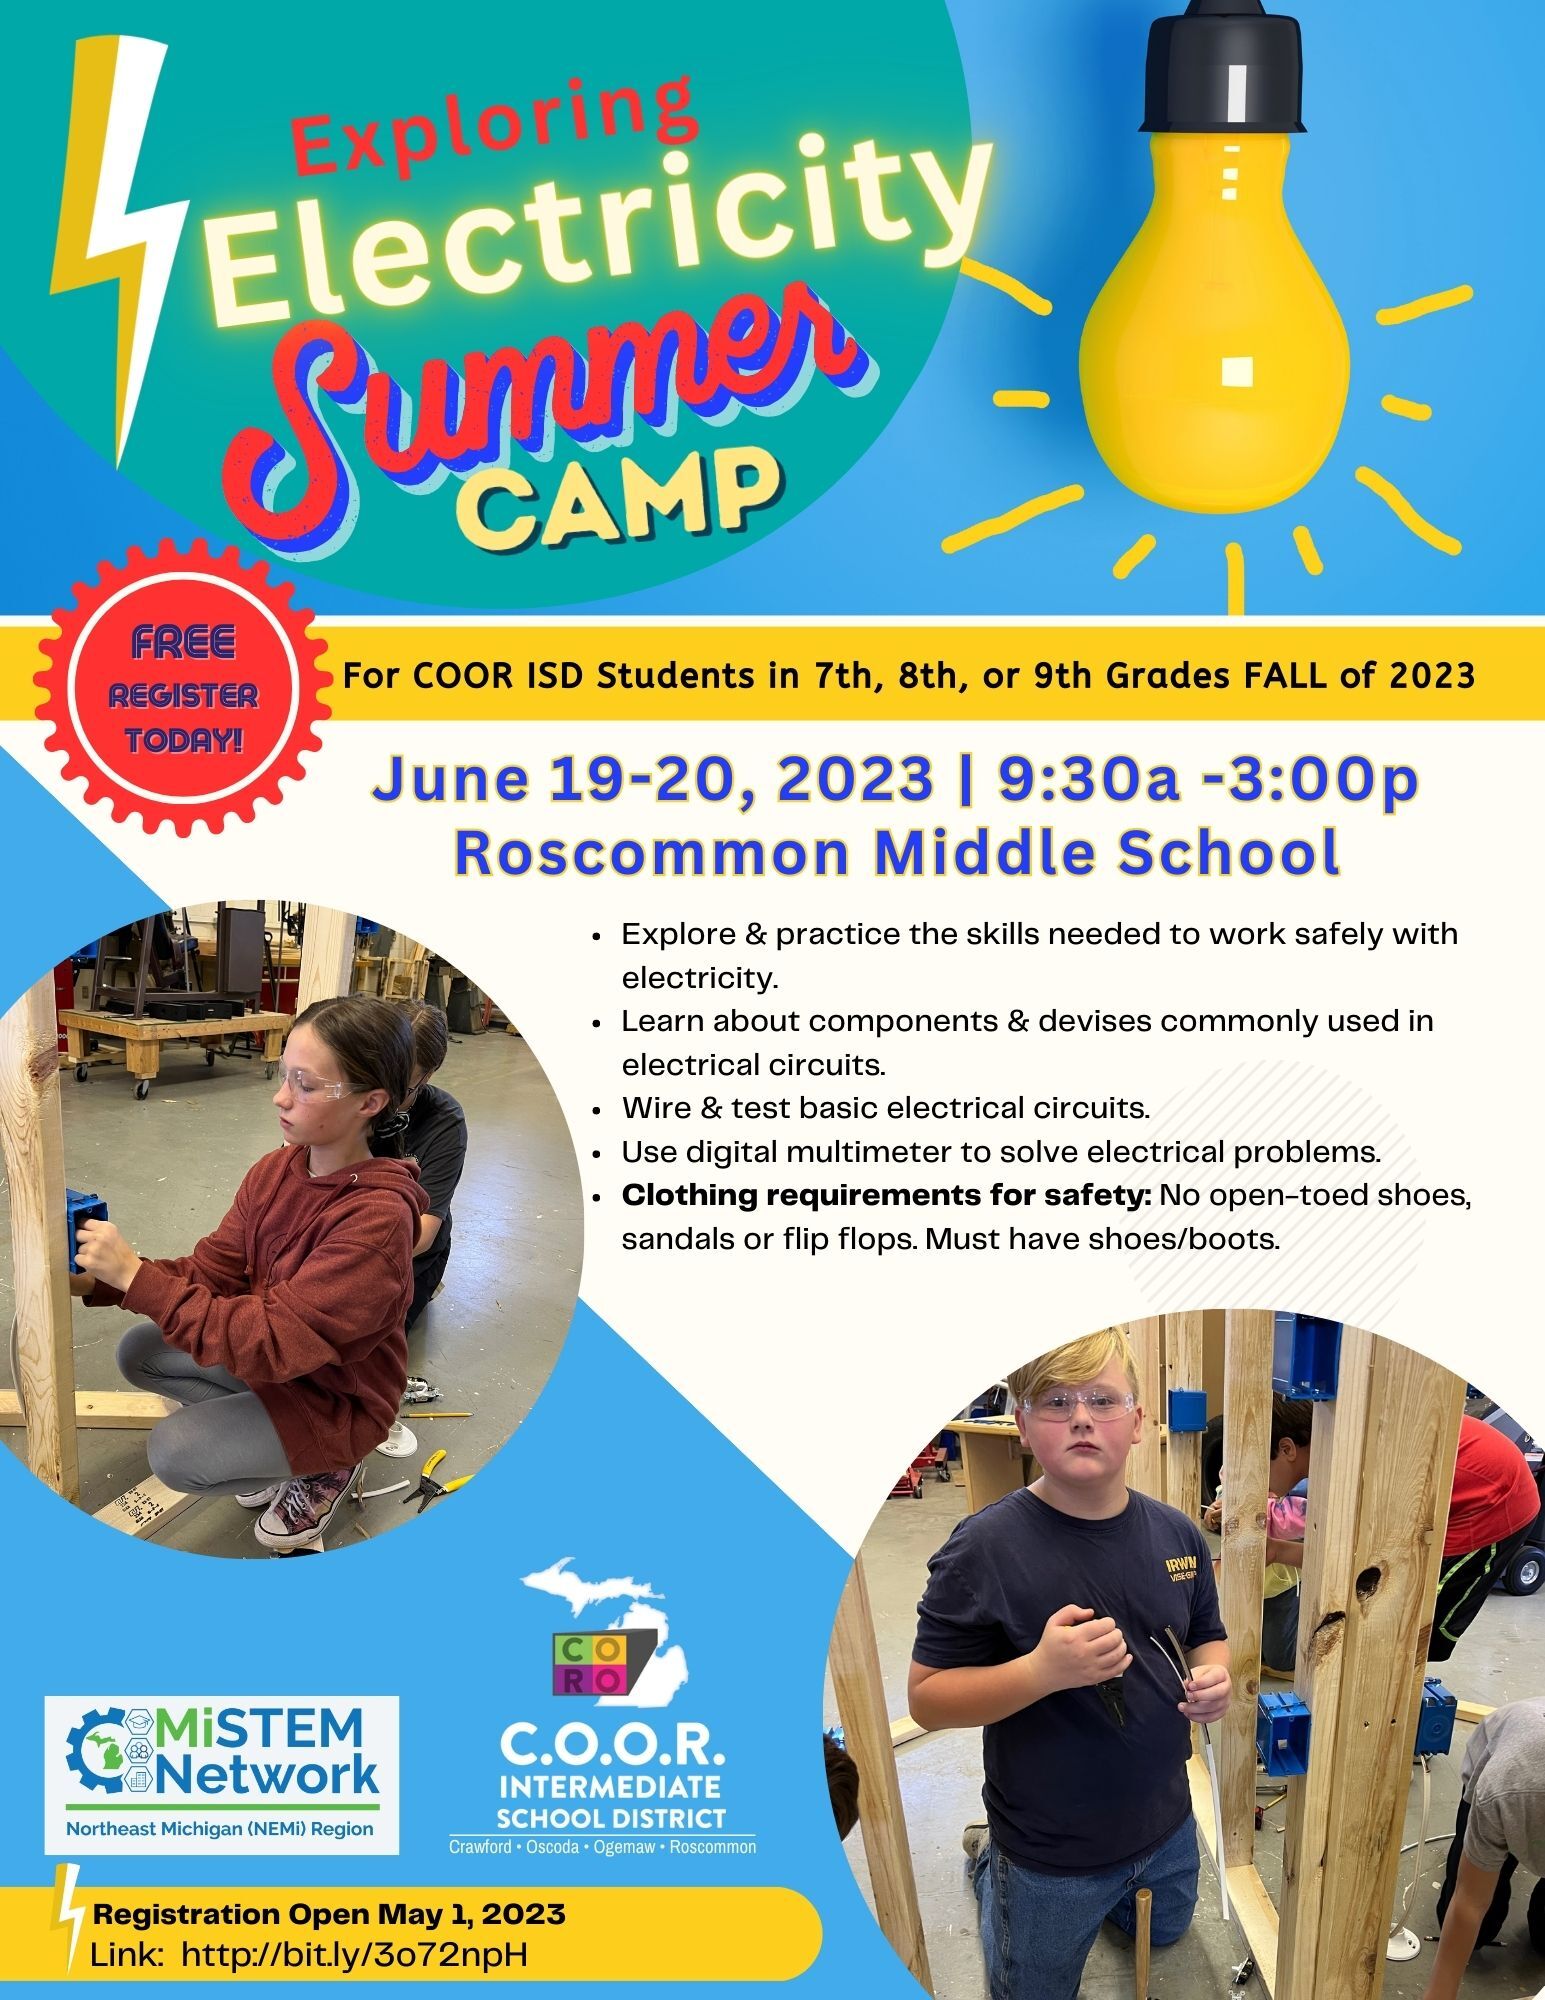 Summer Camp: Exploring Electricity